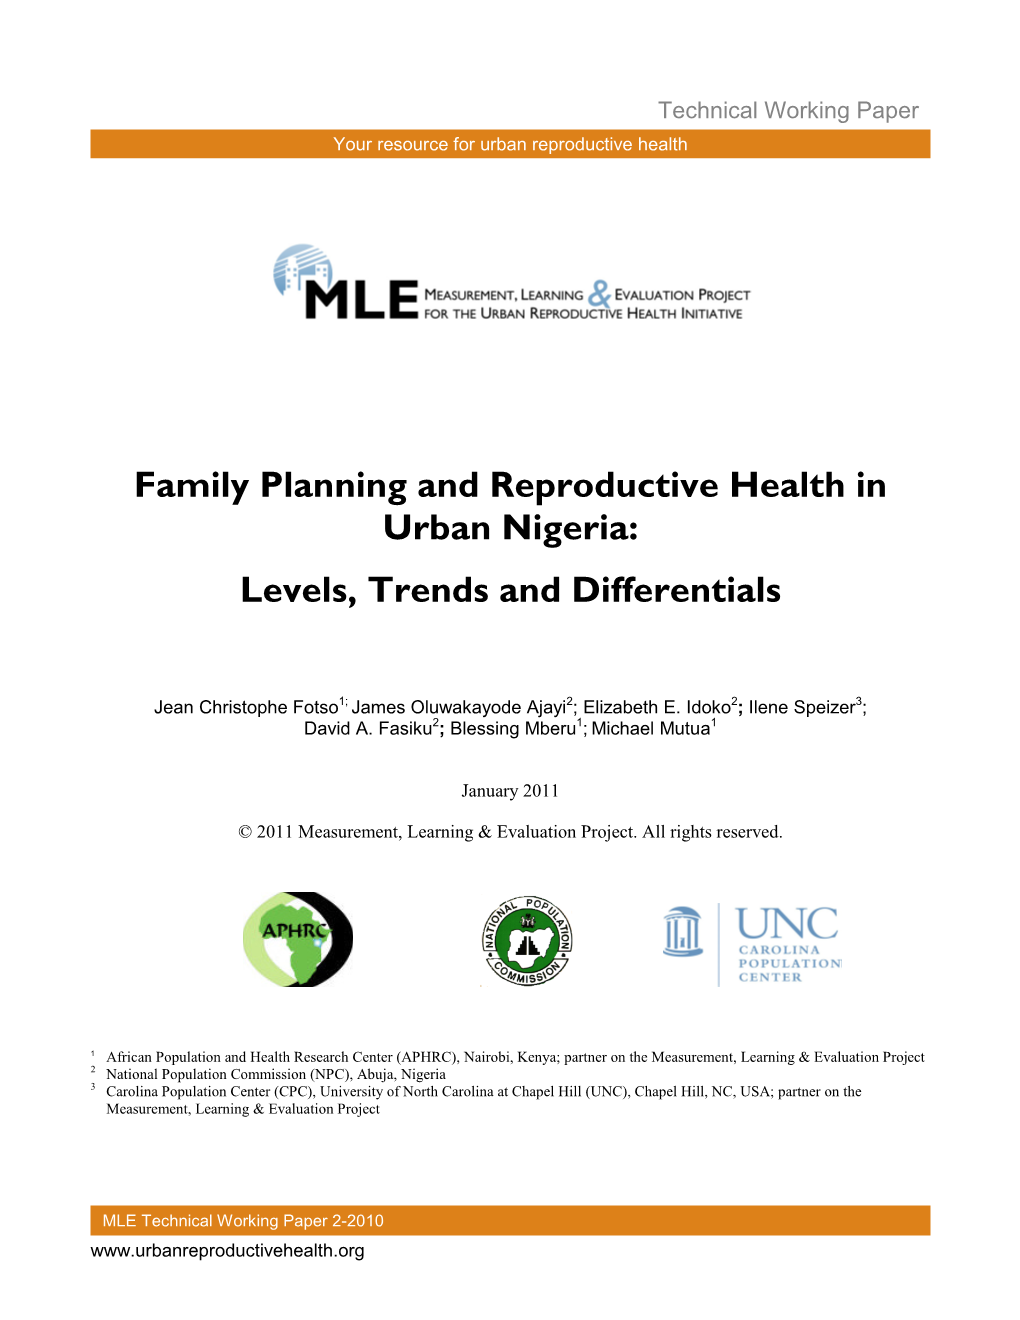 Family Planning and Reproductive Health in Urban Nigeria: Levels, Trends and Differentials